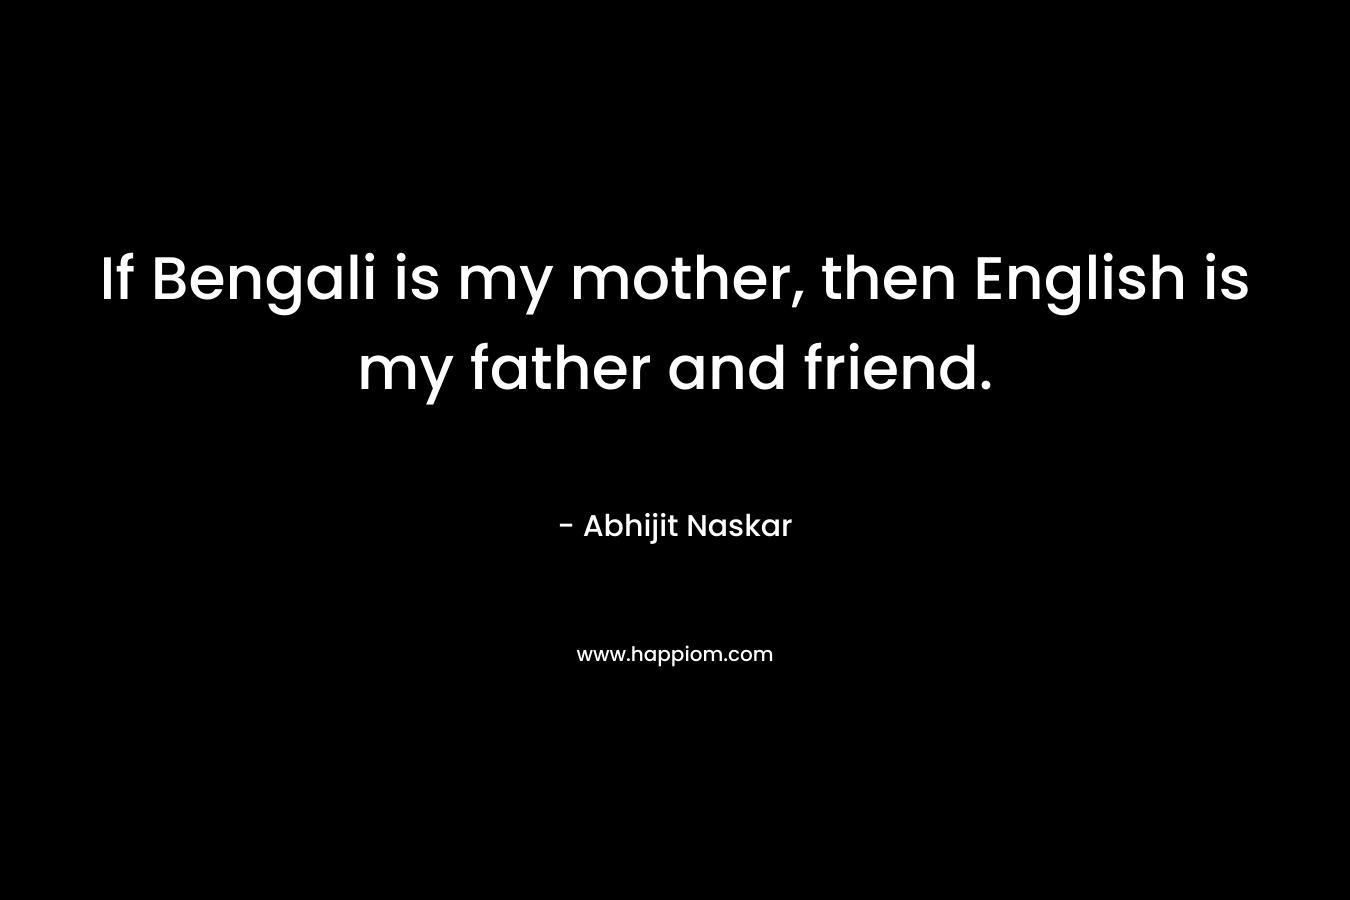 If Bengali is my mother, then English is my father and friend.